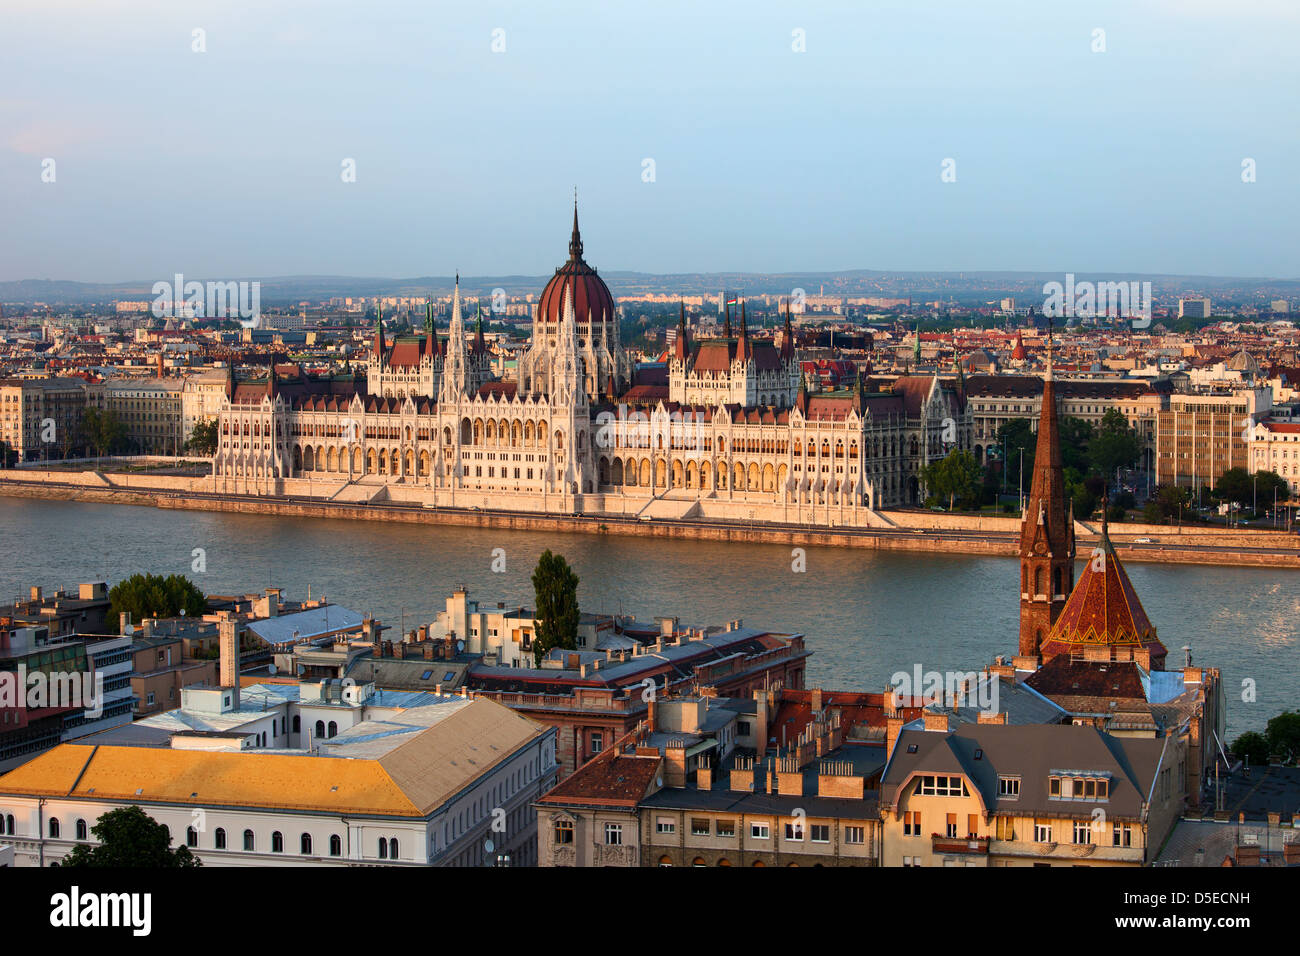 Hungarian Parliament Building at sunset by the Danube river in the city of Budapest, Hungary. Stock Photo